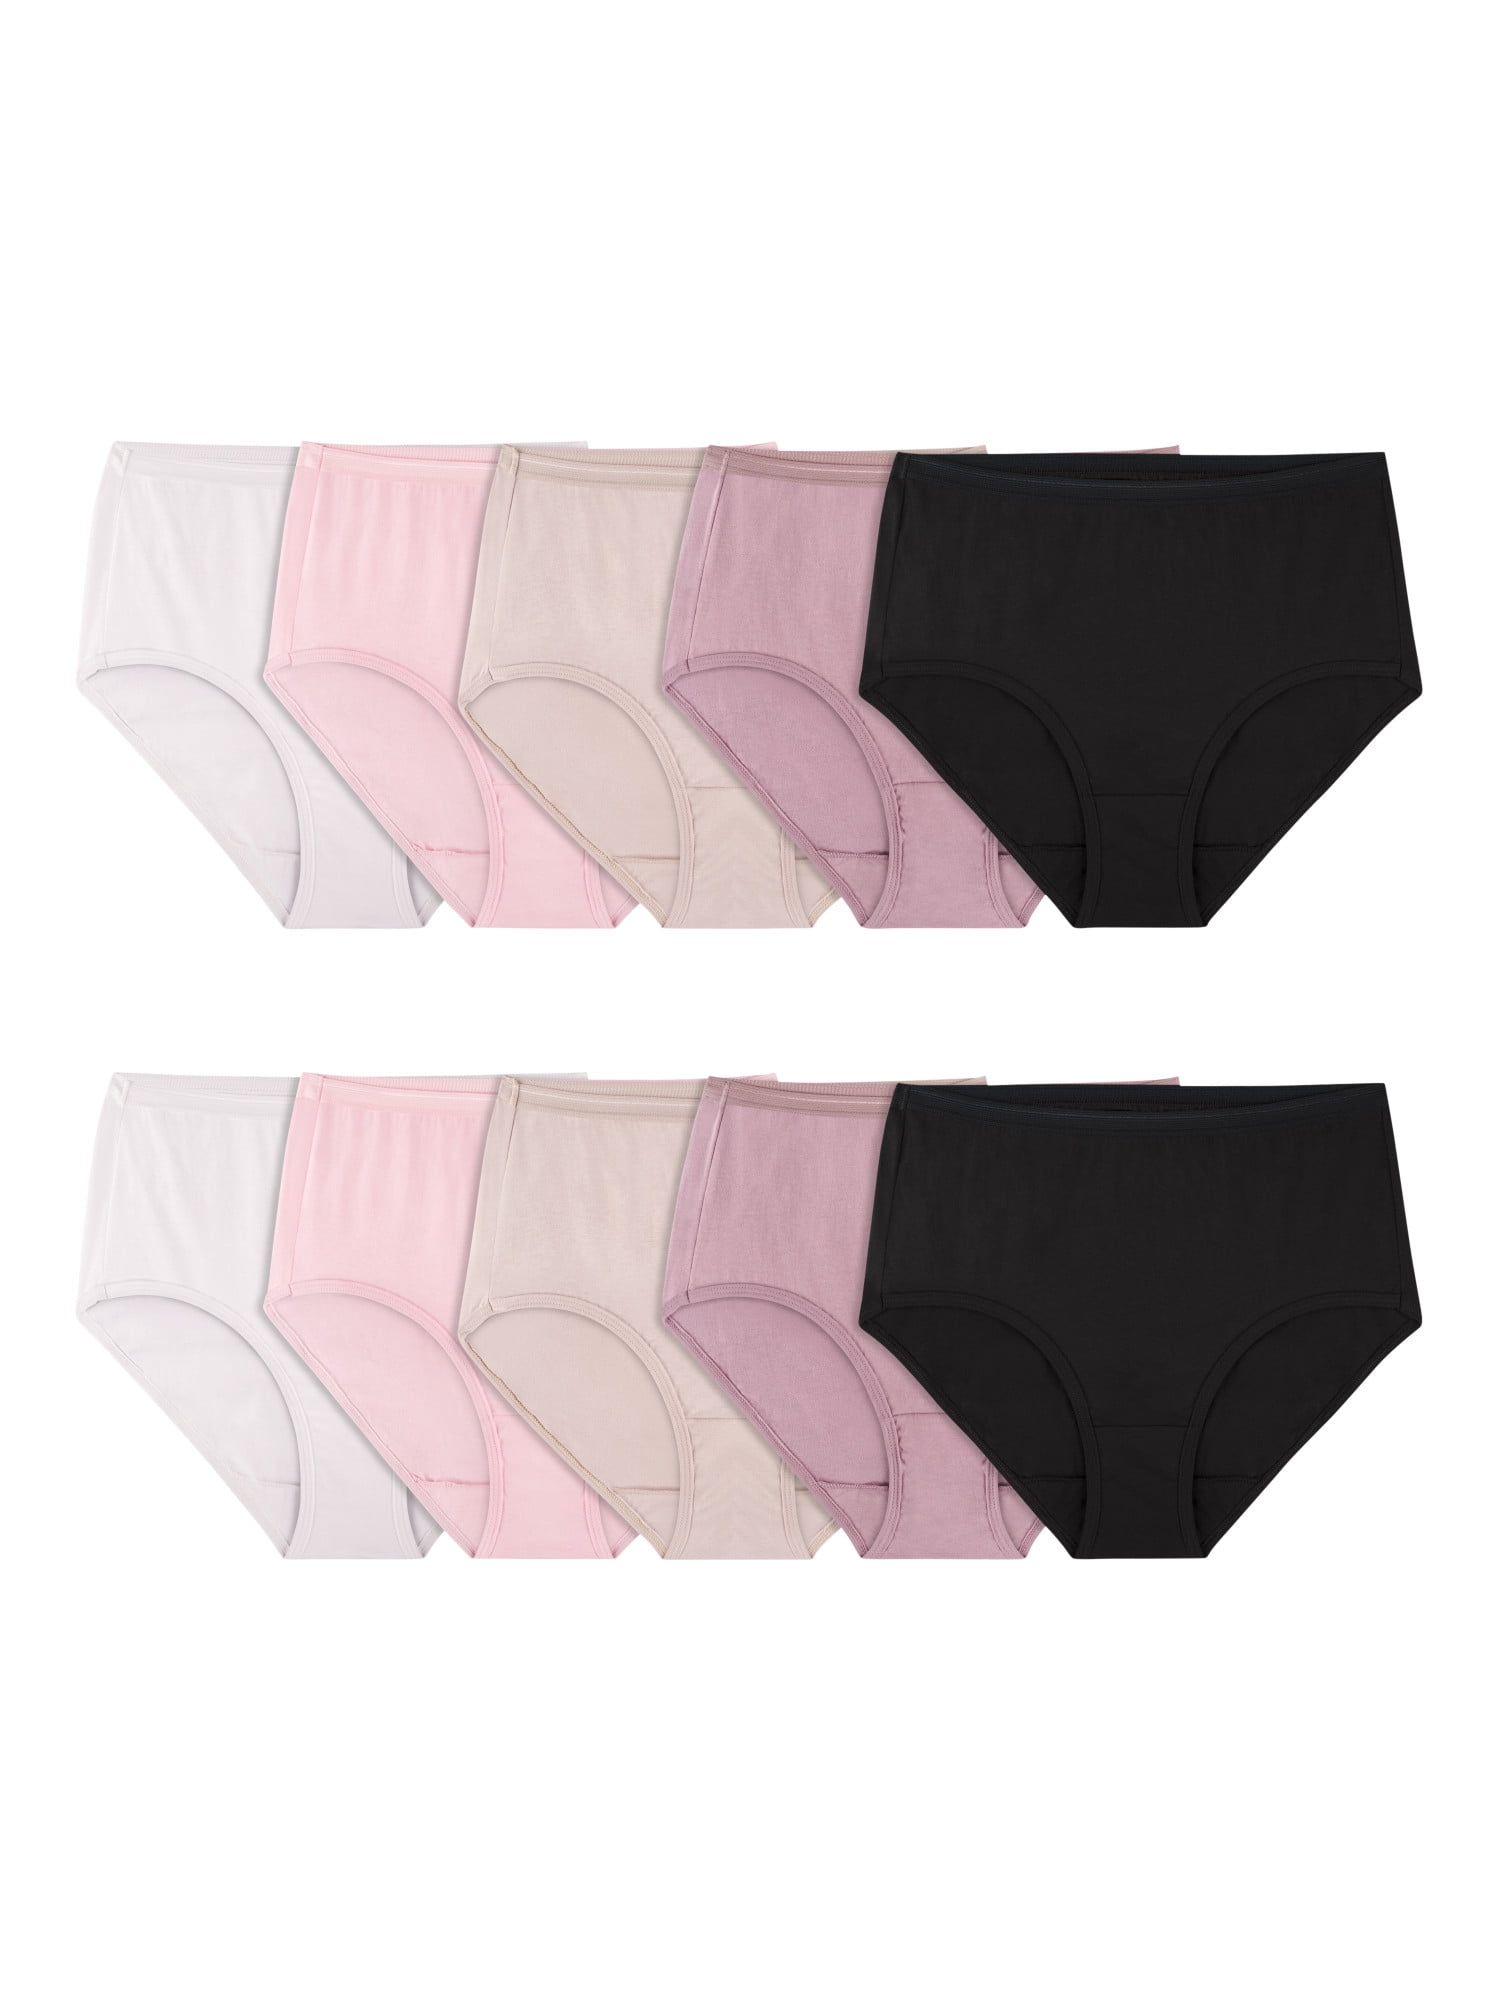 Our Point of View on Fruit of the Loom Cotton Brief Panties From  